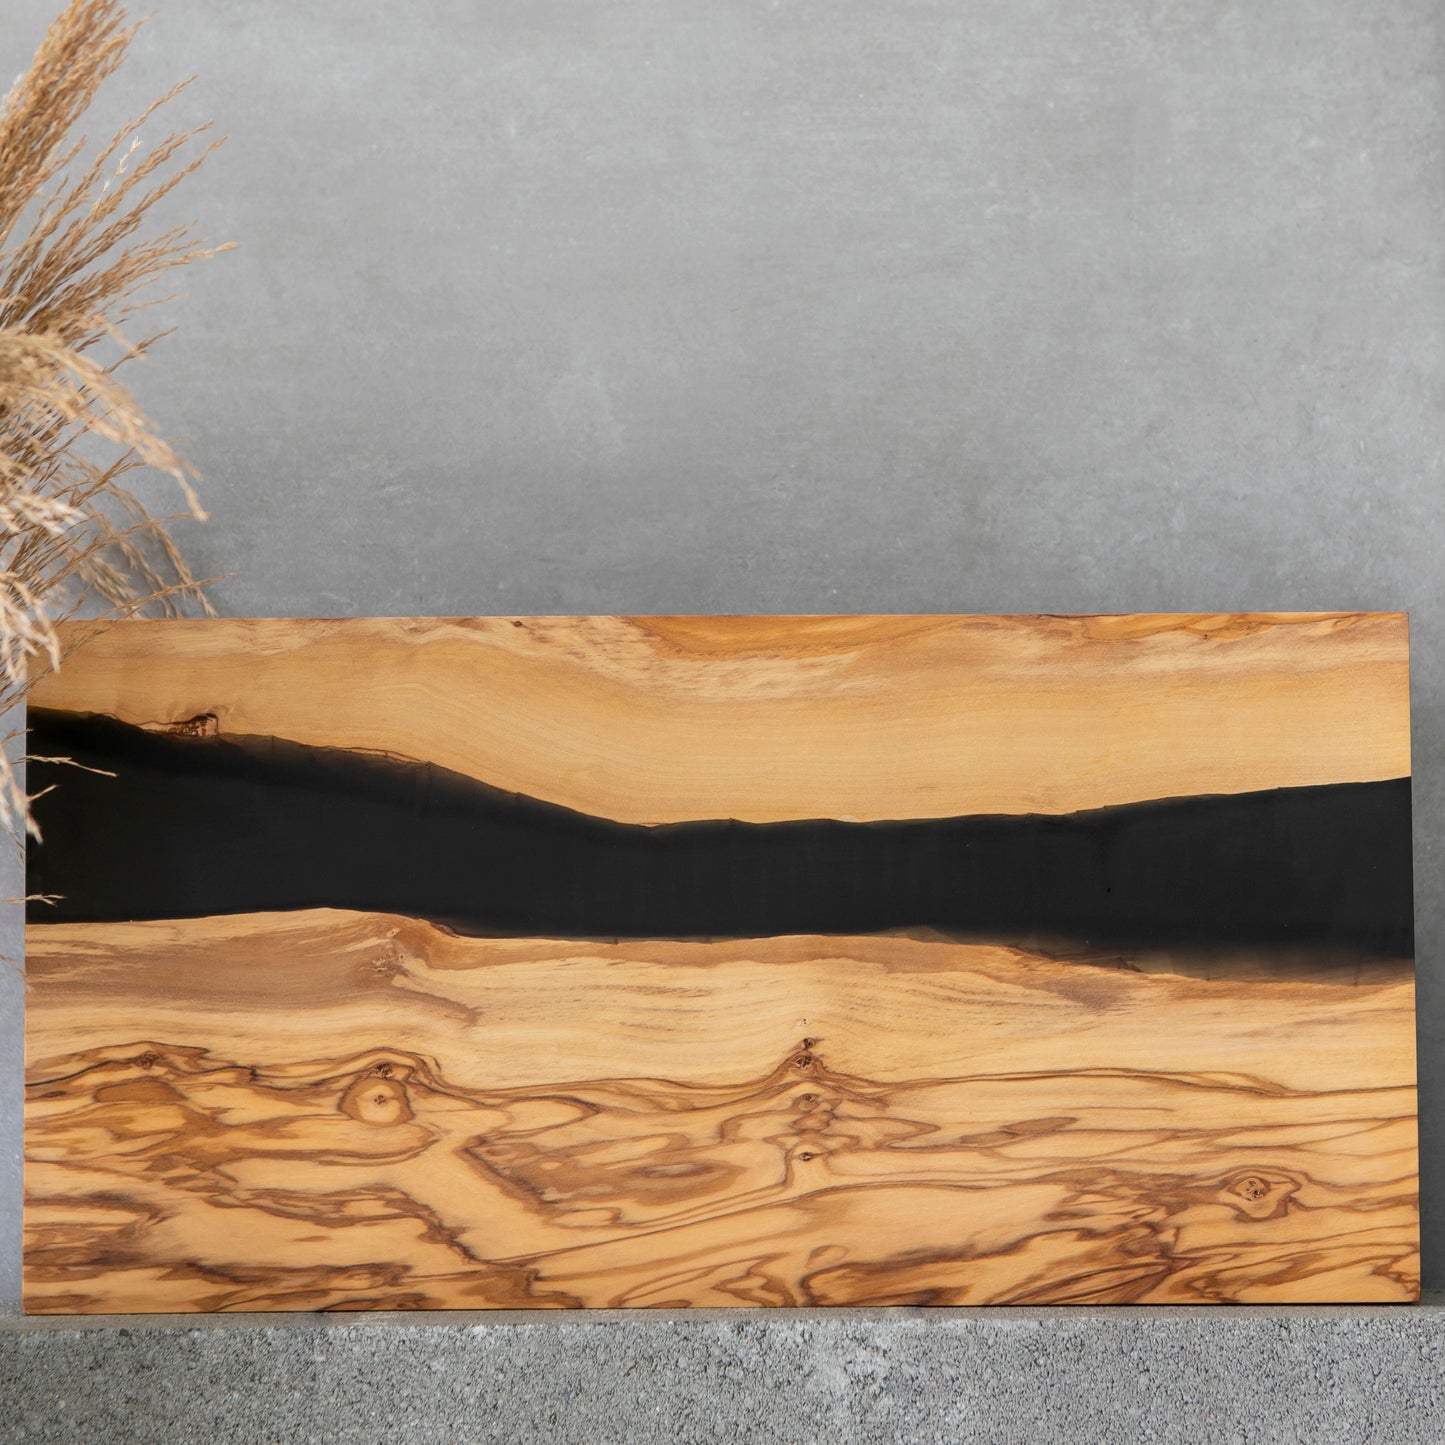 Olive Wood River Board Gift Set with Resin, Charcuterie Board, Resin Cheese Board, Personalized Charcuterie Board, Engraved Cheese Board